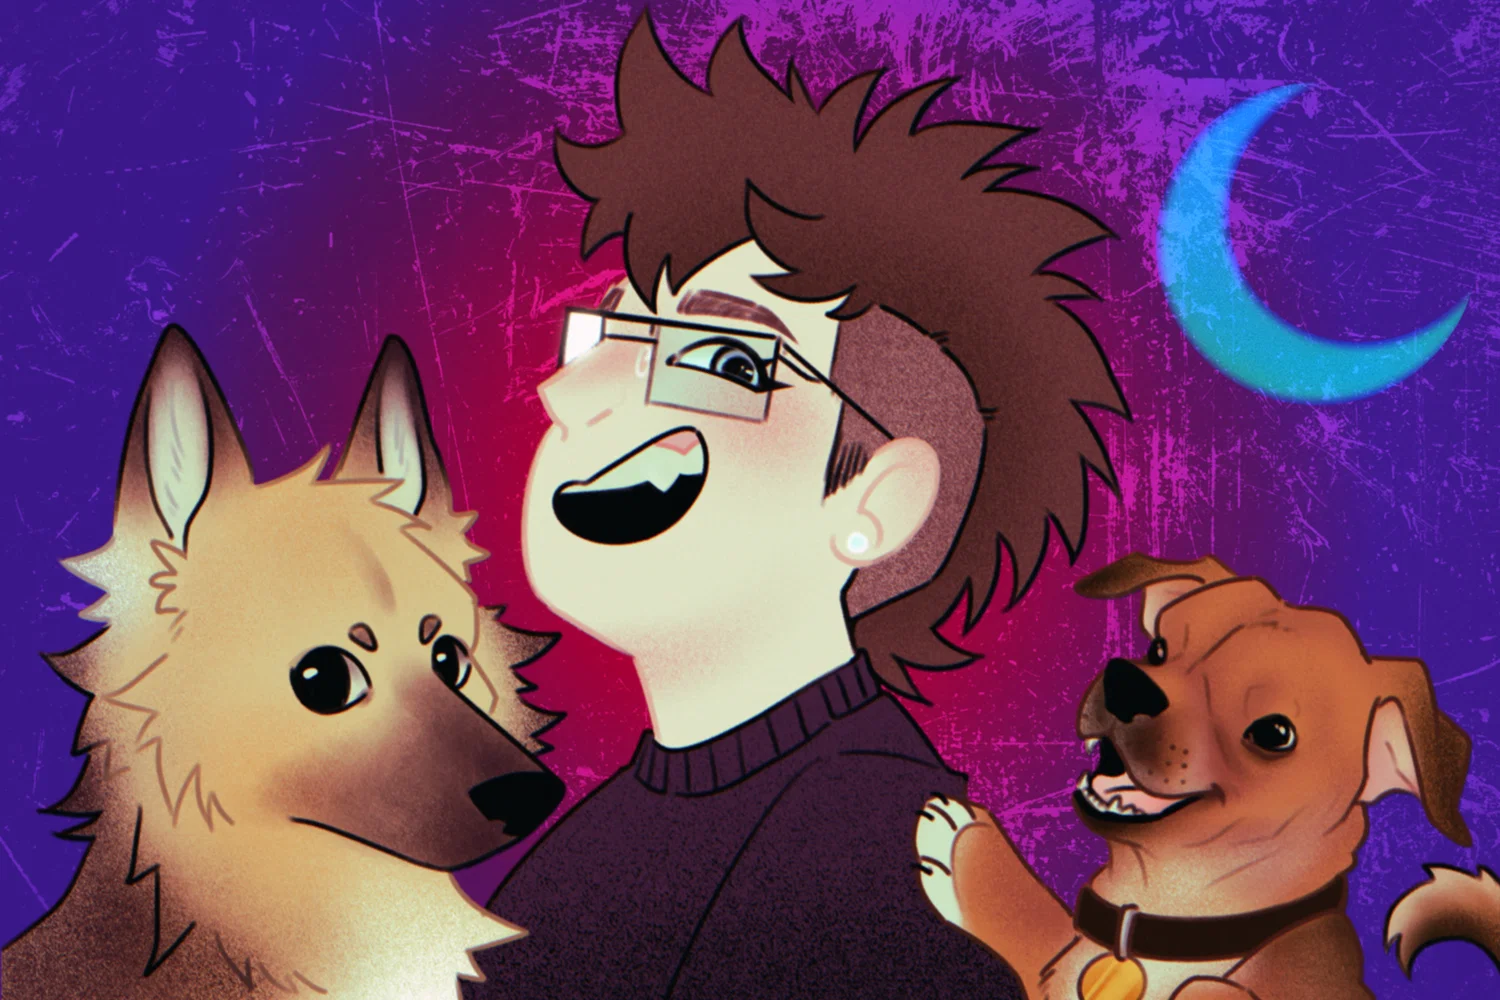 Digital illustrative portrait of Shannon Badenoch and her two dogs. A purple and red gradient background with a blue moon is in the background.